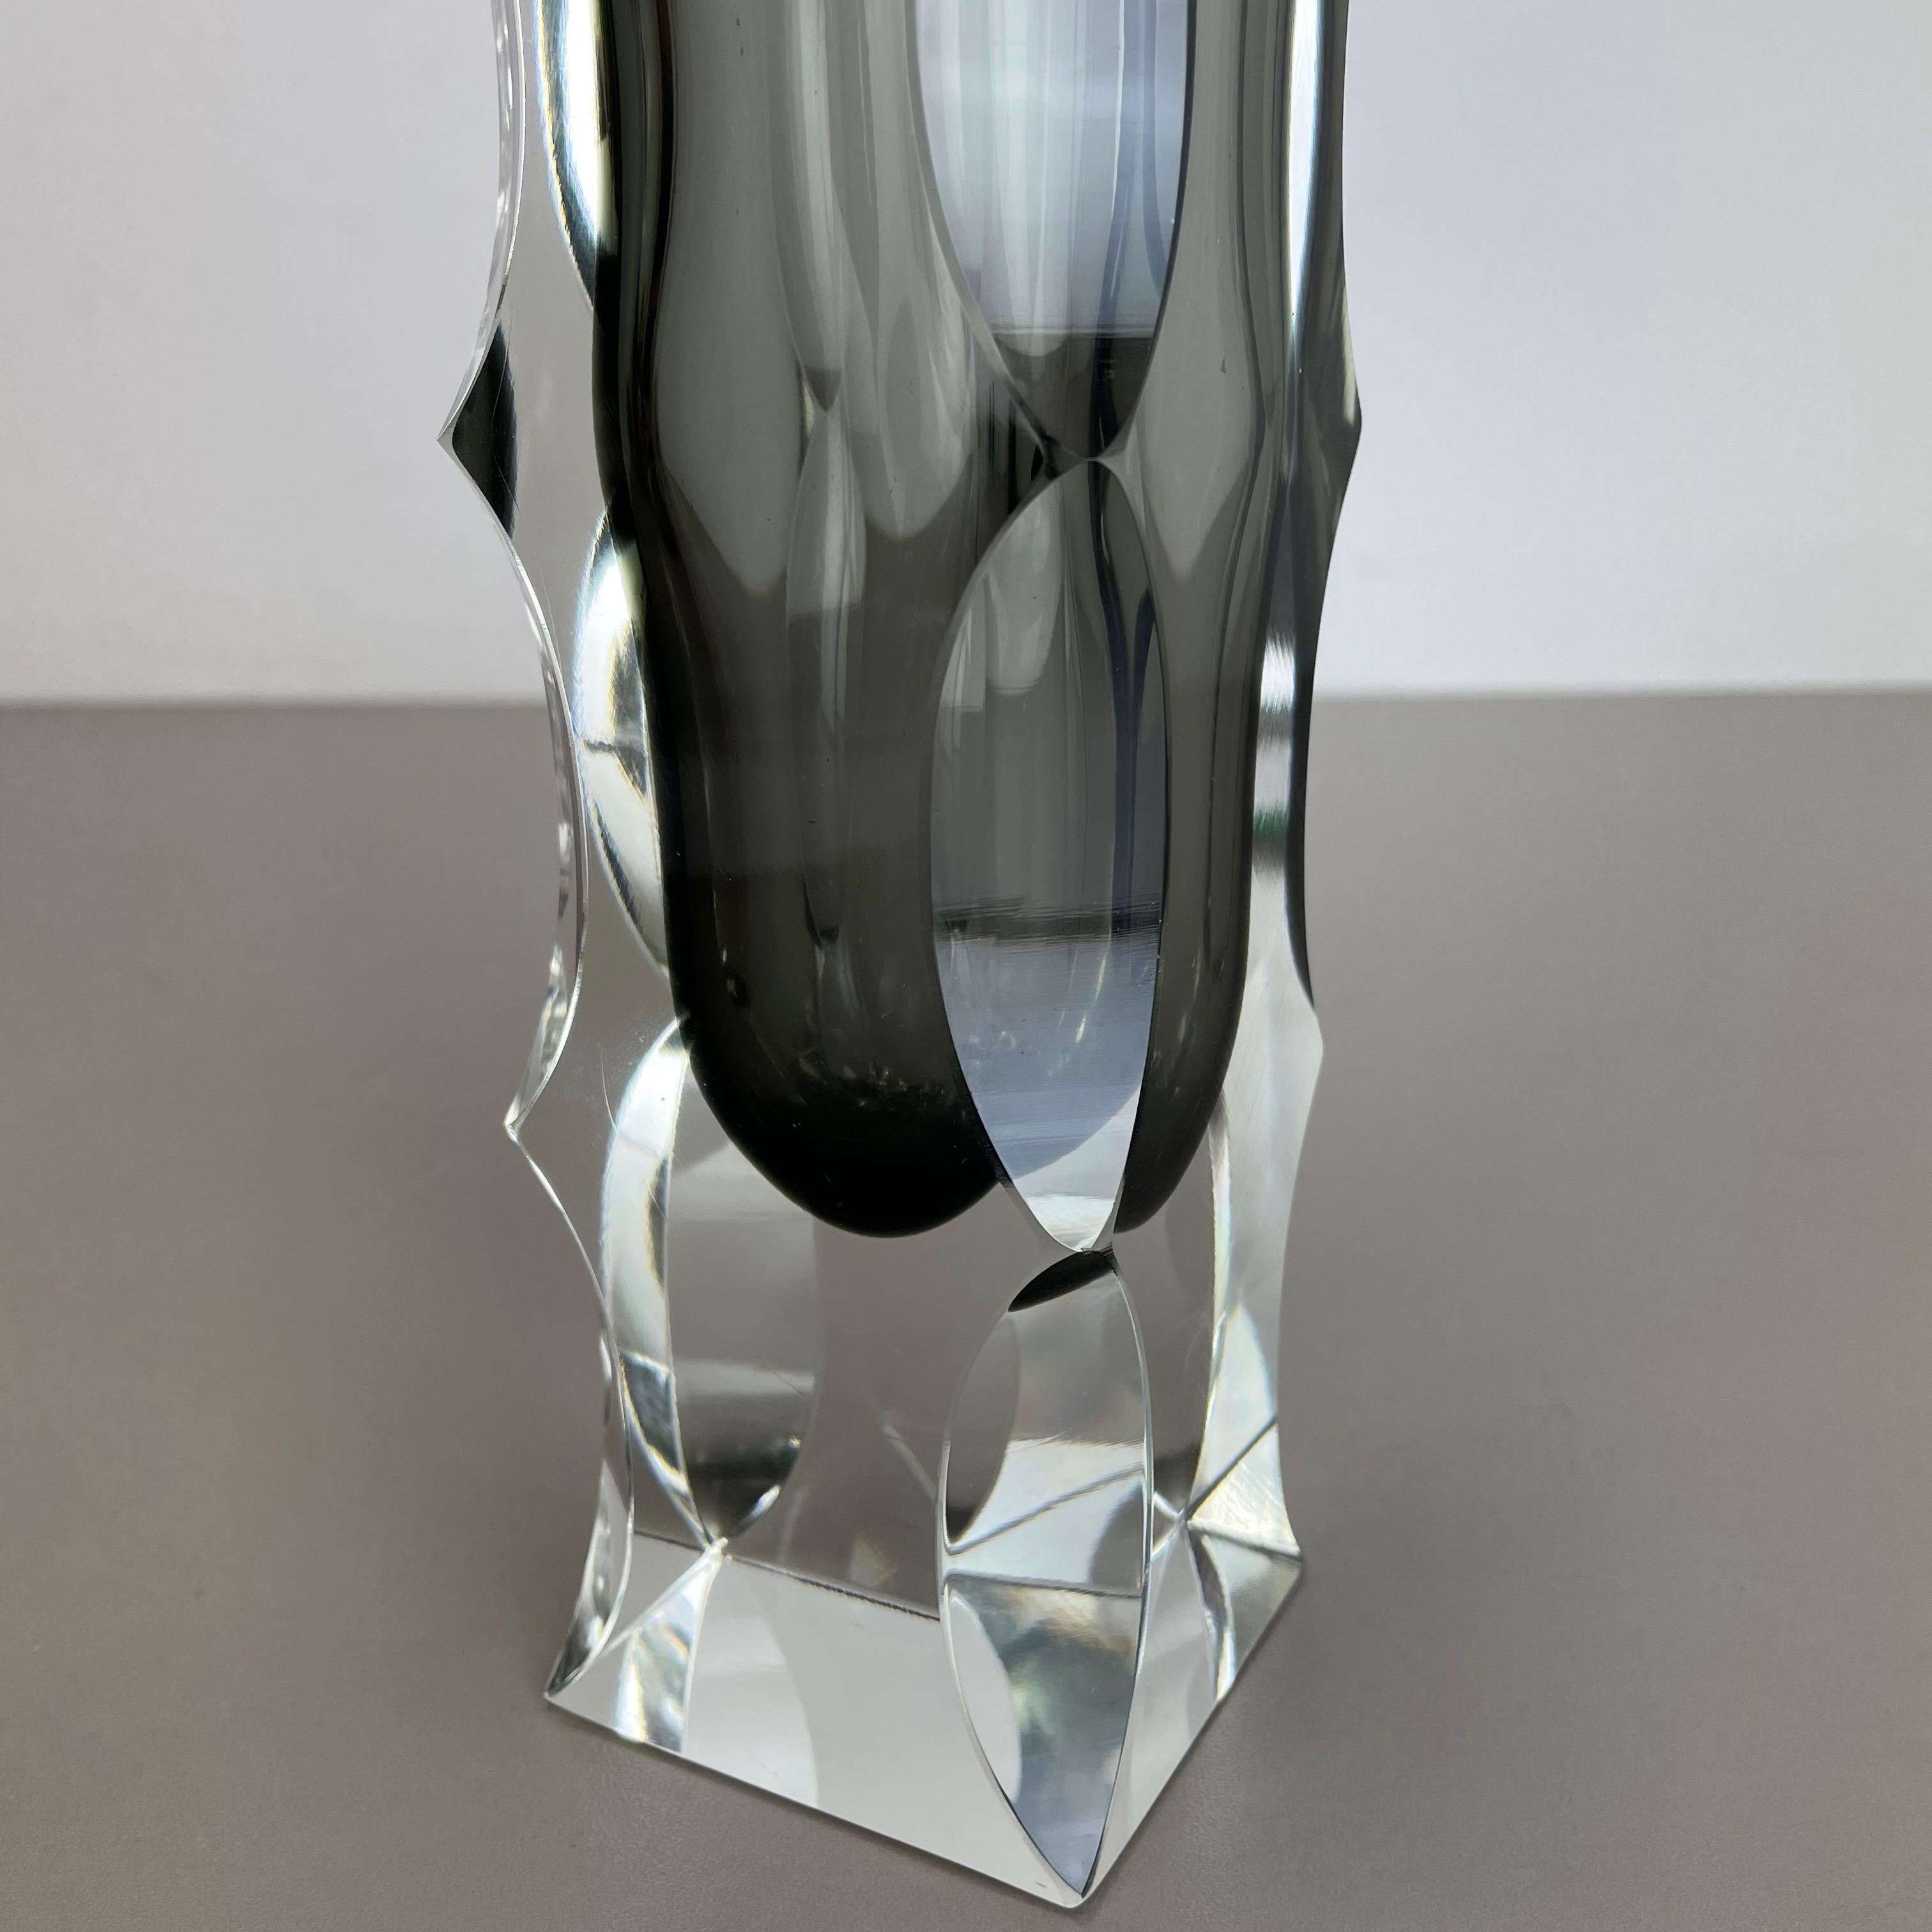 Extra Large Mandruzzato Faceted Glass Sommerso Vase Made in Murano, Italy For Sale 4